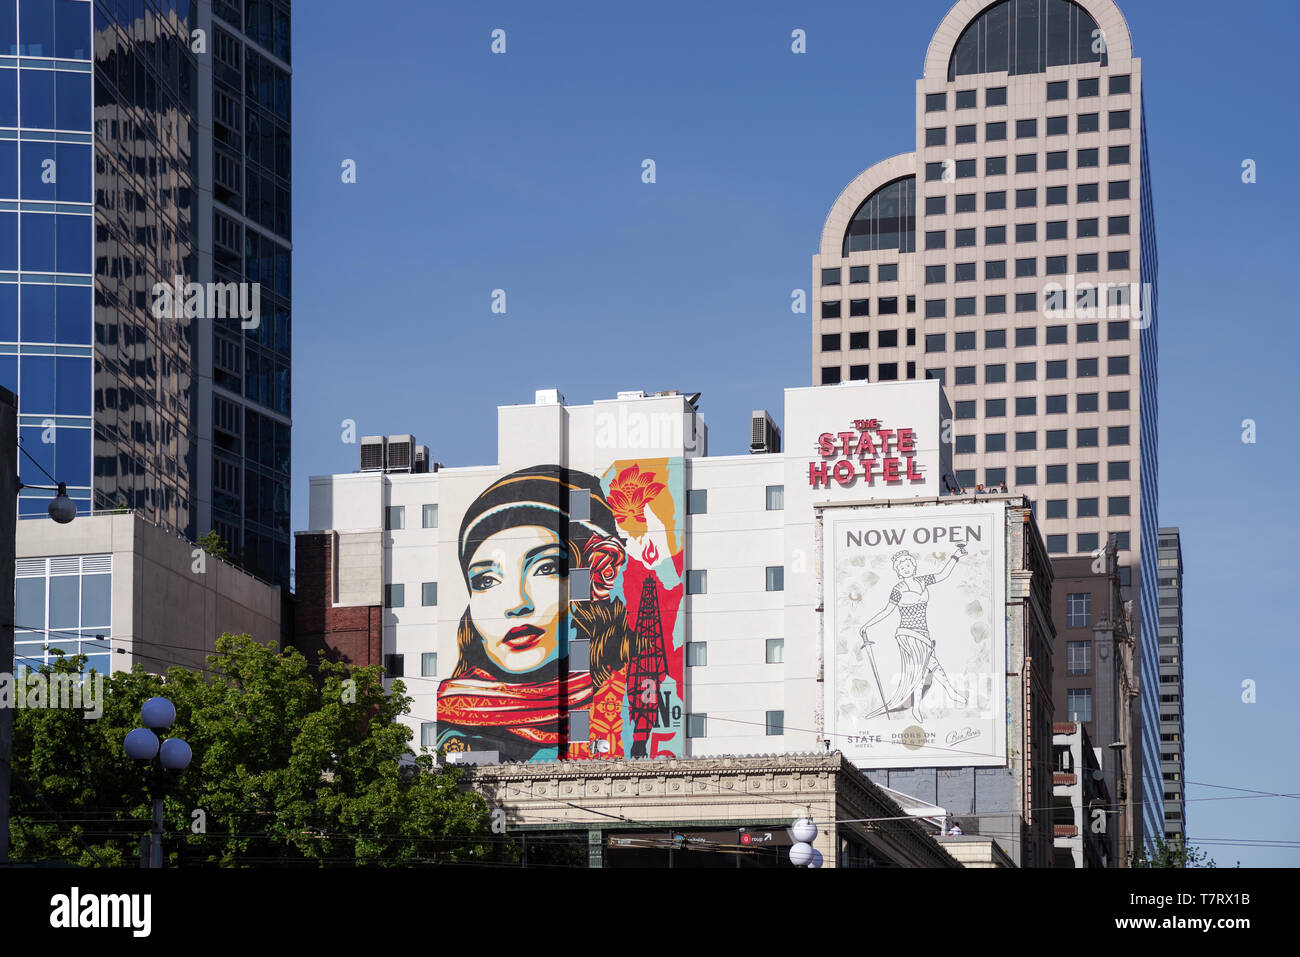 Mural by artist Shephard Fairey on the side of the State Hotel overlooking Pike Place Market - Seattle, Washington State, USA Stock Photo